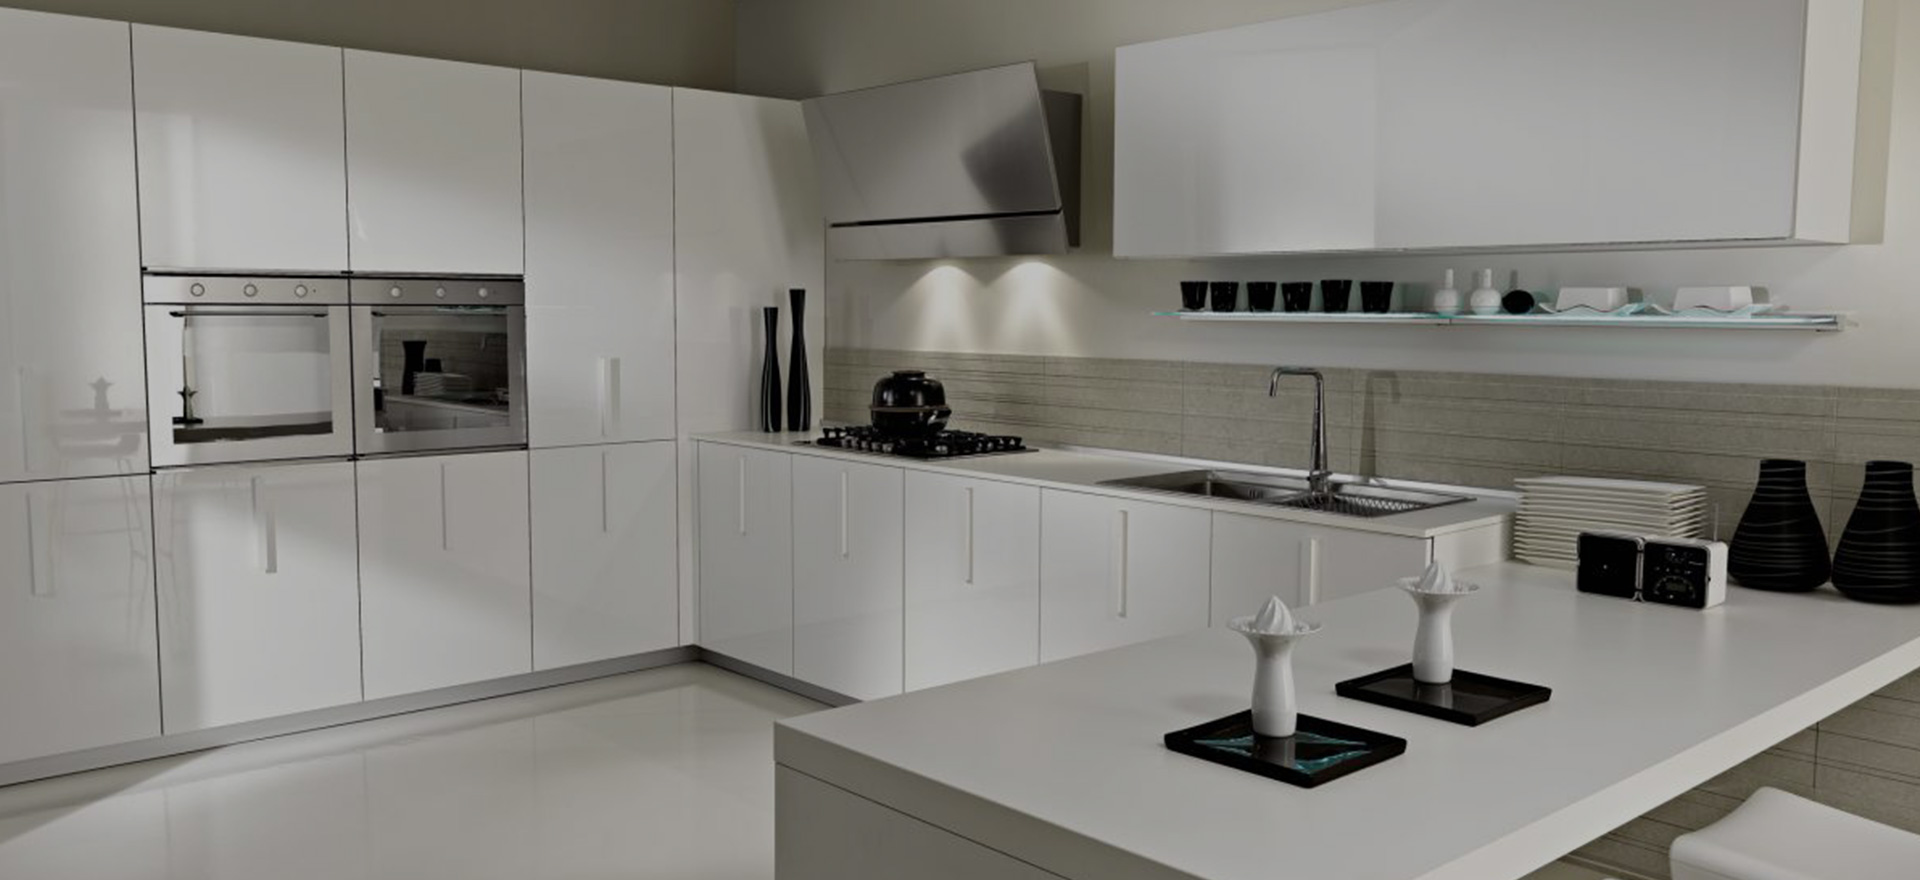 Our surfaces comprise of 93 % quartz mineral<br/> which is one of the hardest and the most resistant minerals in nature.